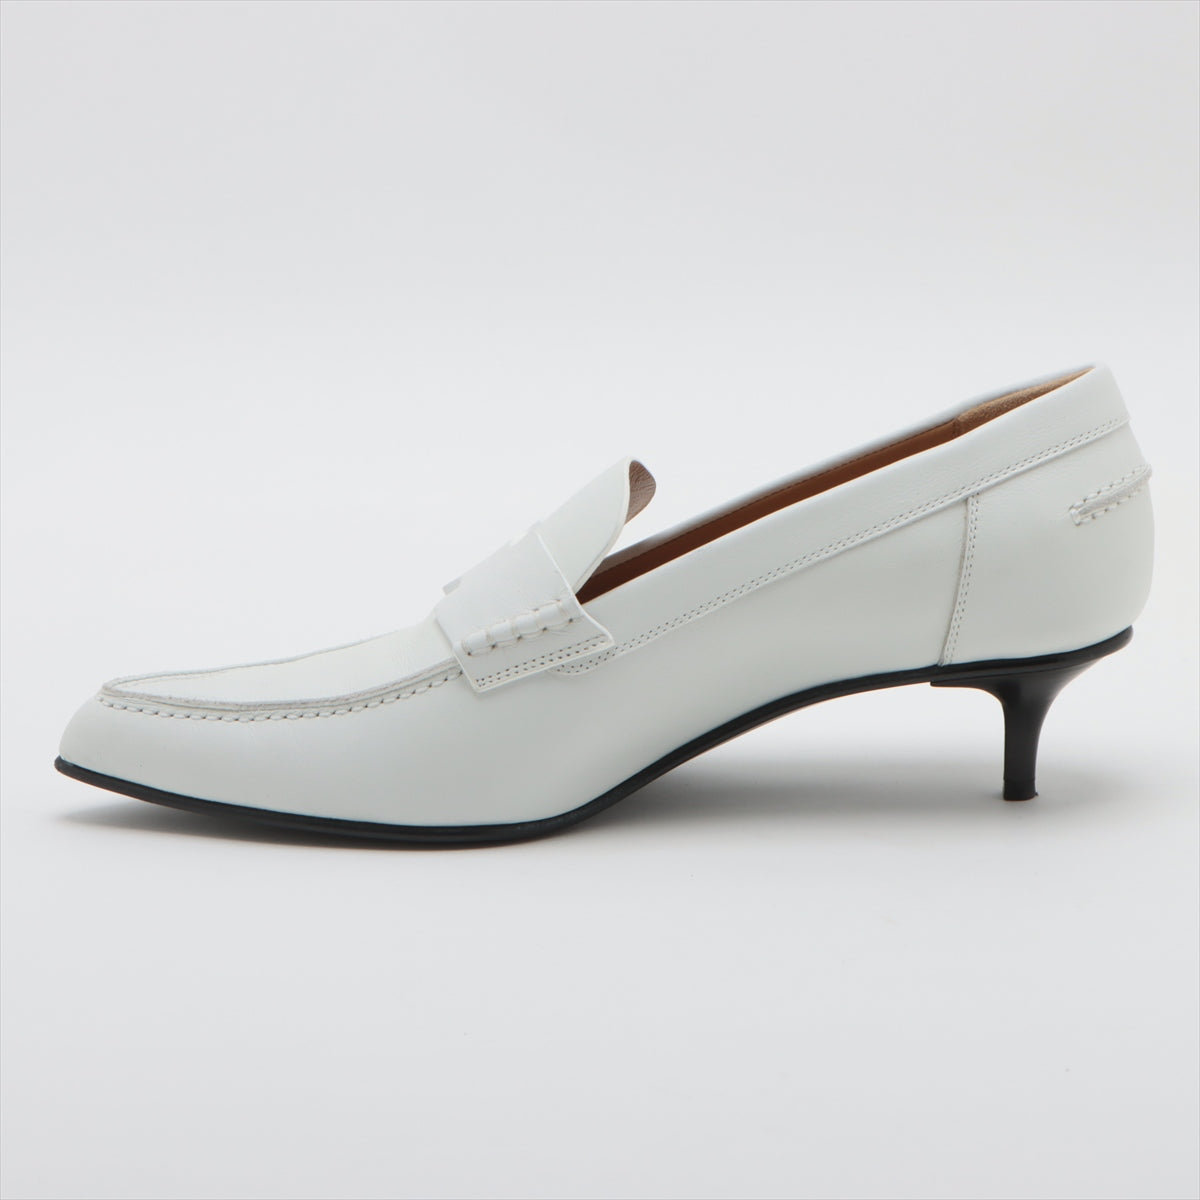 Hermès グロリアス Leather Pumps 37.5 Ladies' White 替えリフト付き box There is a storage bag